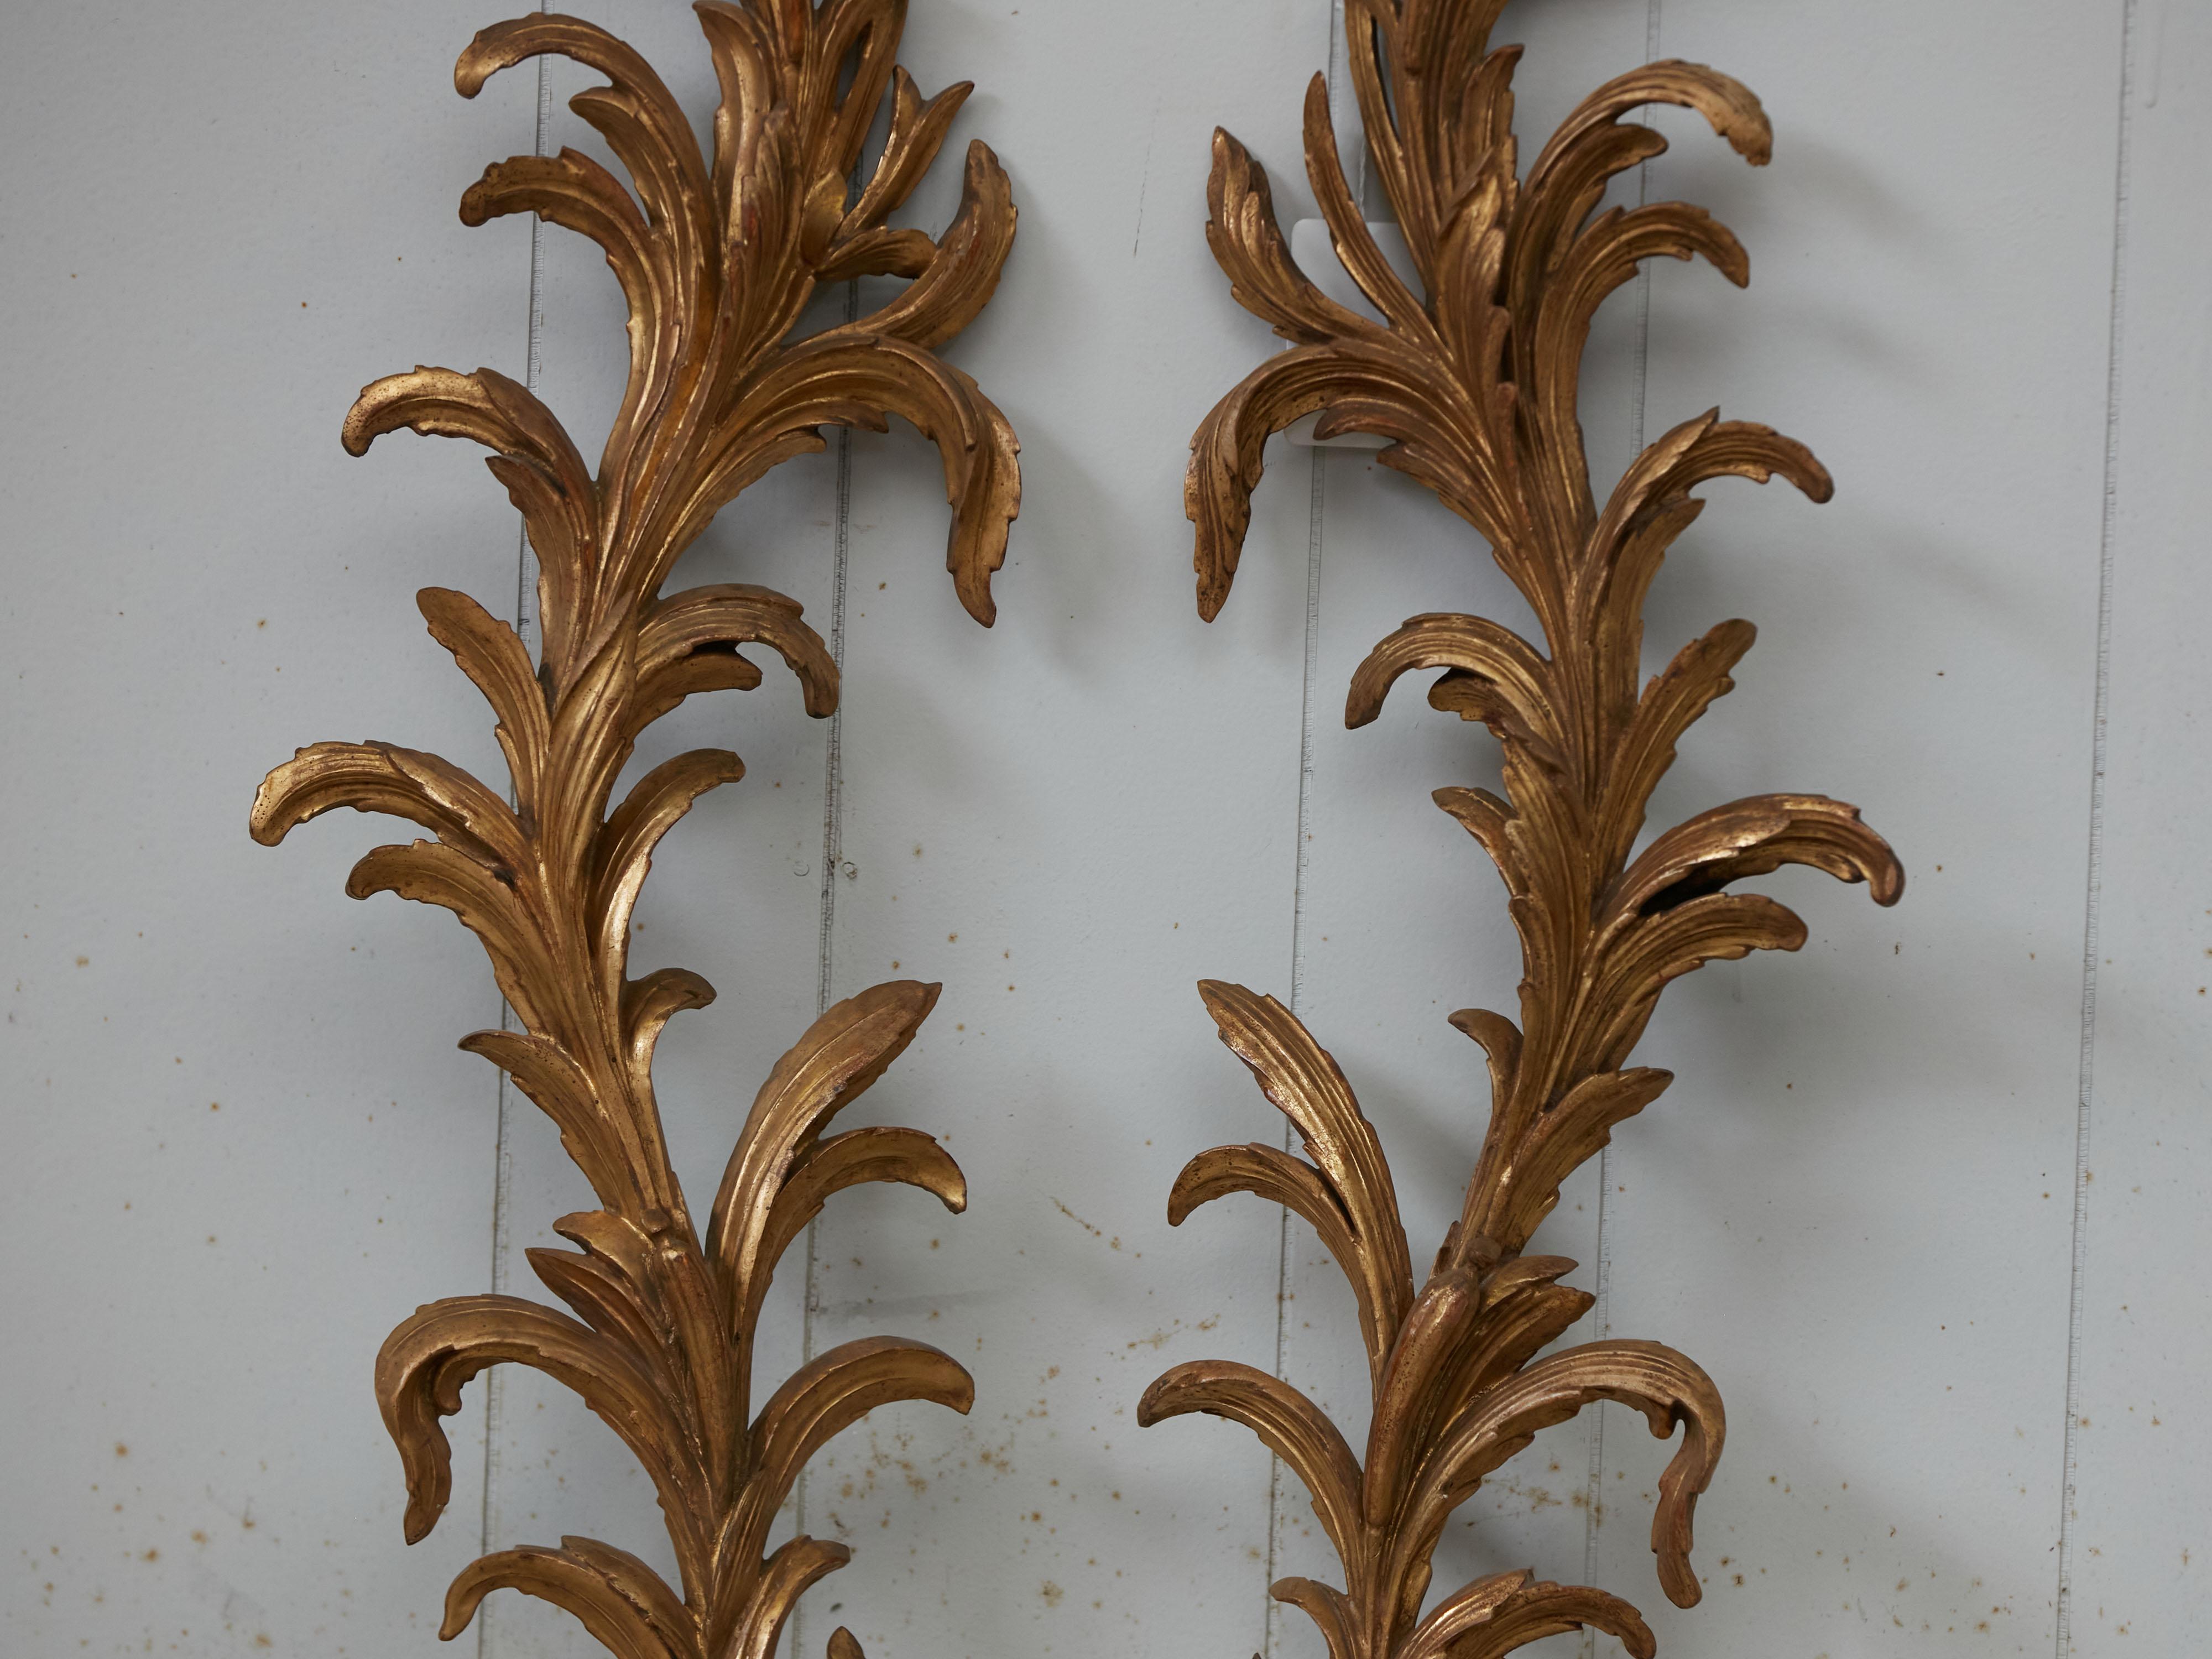 19th Century Pair of Italian 1820s Carved Giltwood Wall Fragments Depicting Scrolling Foliage For Sale